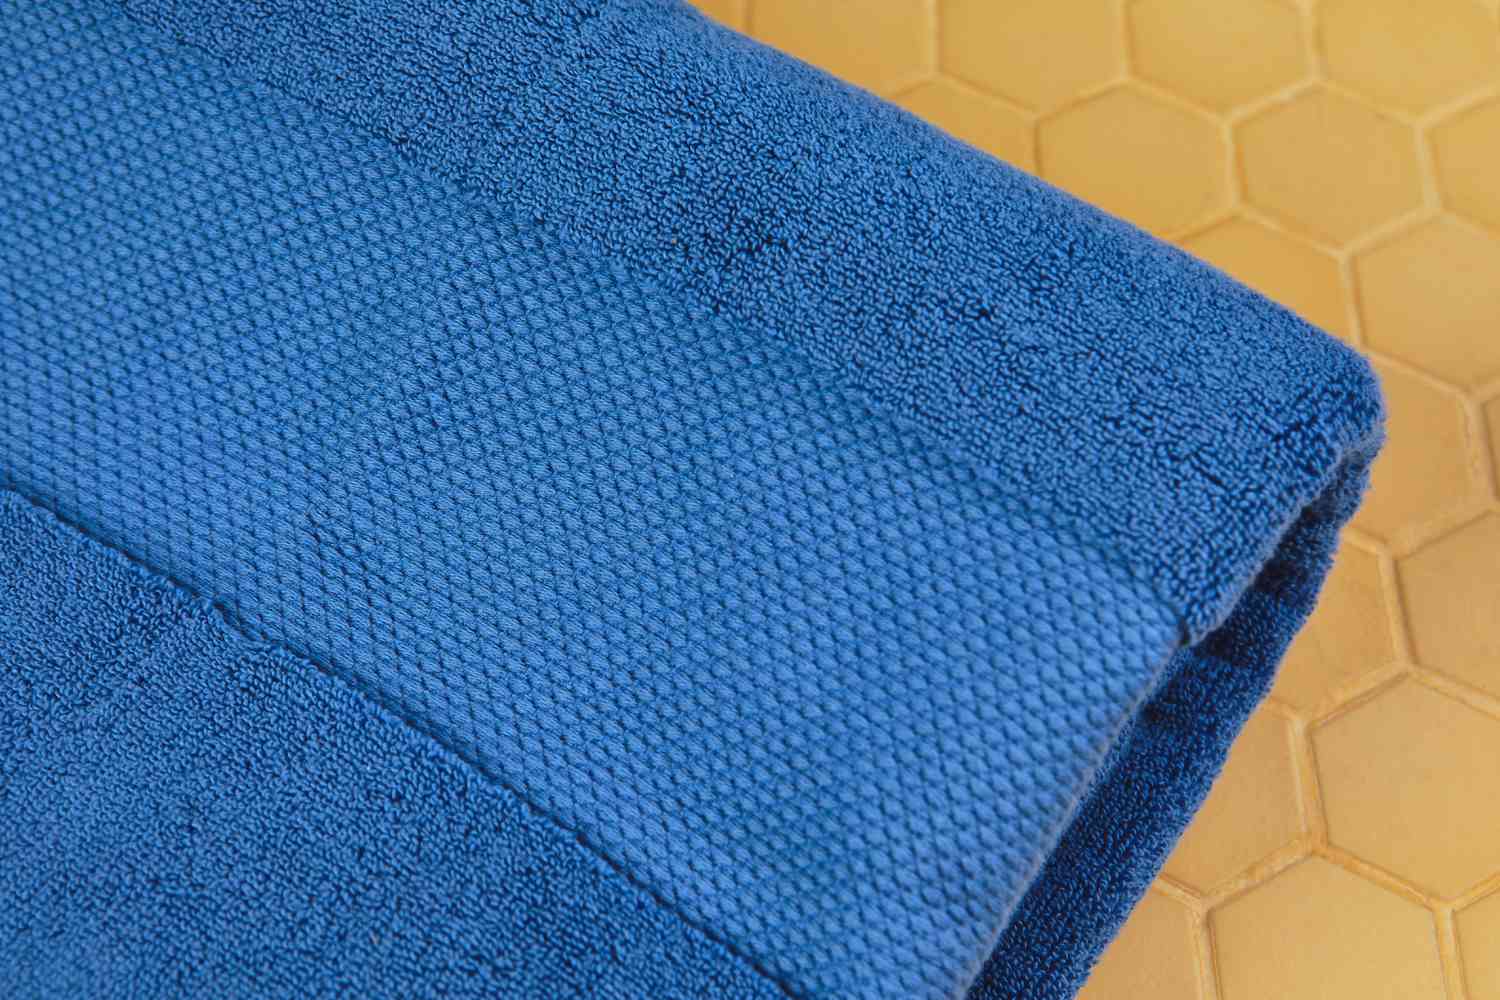 Closeup of Frontgate Resort Collection Bath Towel on yellow tile surface